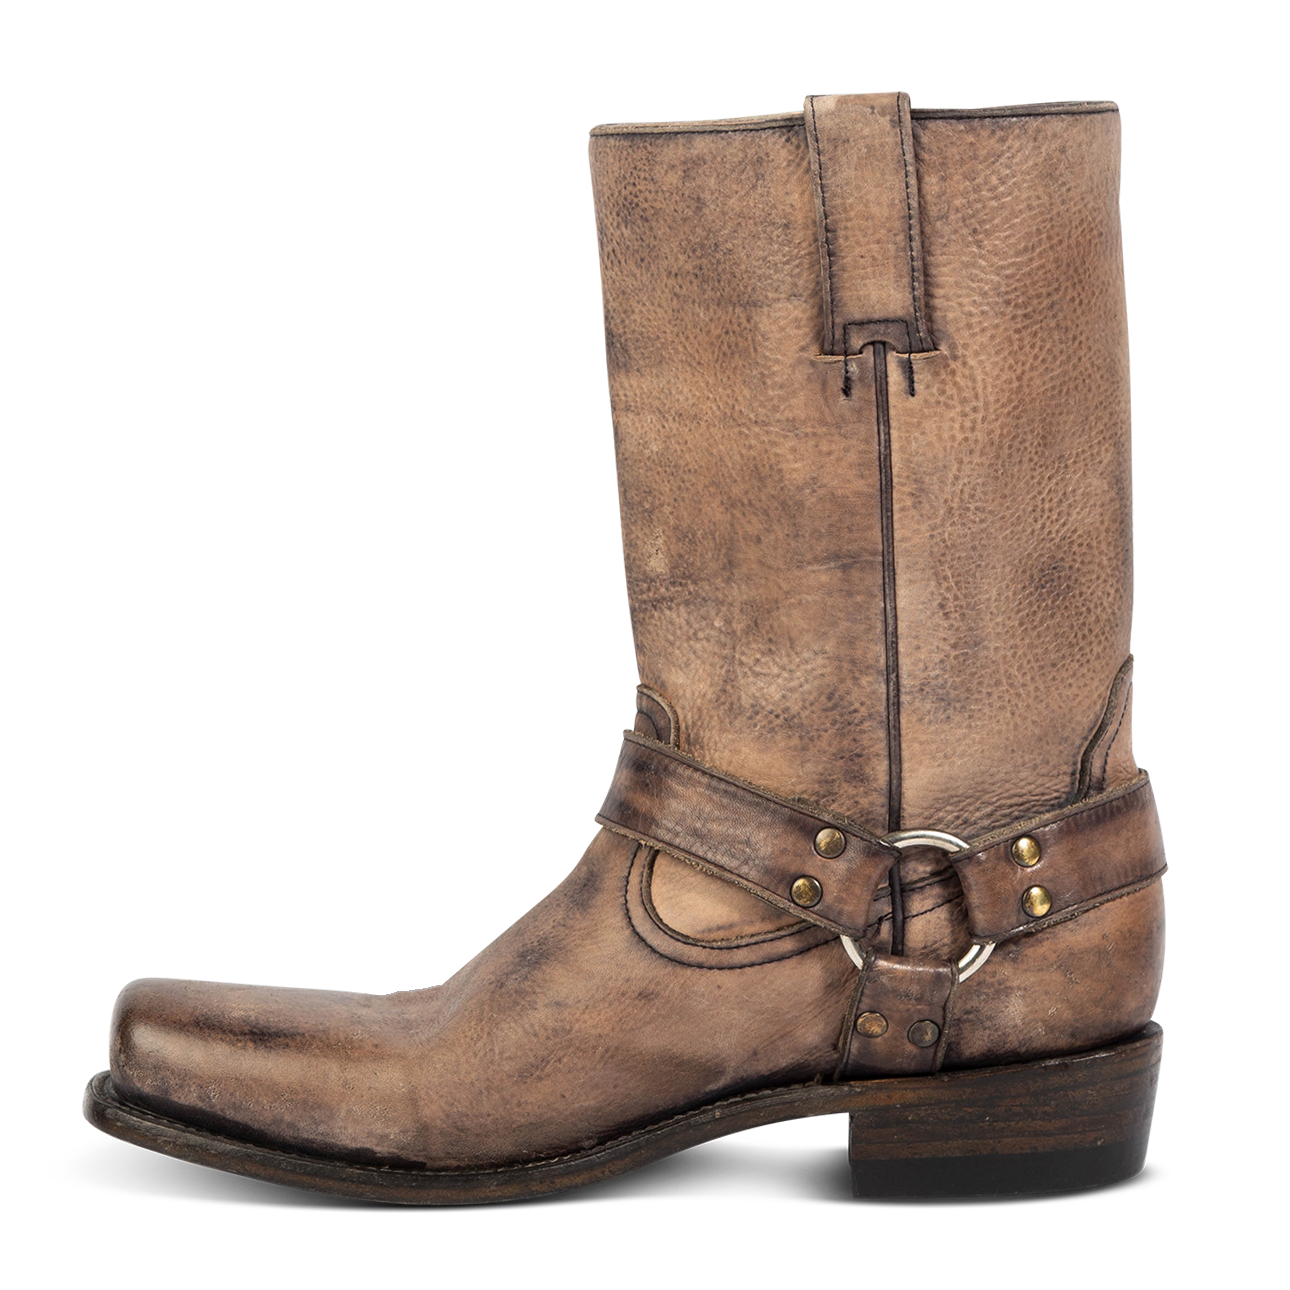 Inside view showing leather ankle harness with brass hardware on FREEBIRD men's Copperhead grey distressed boot